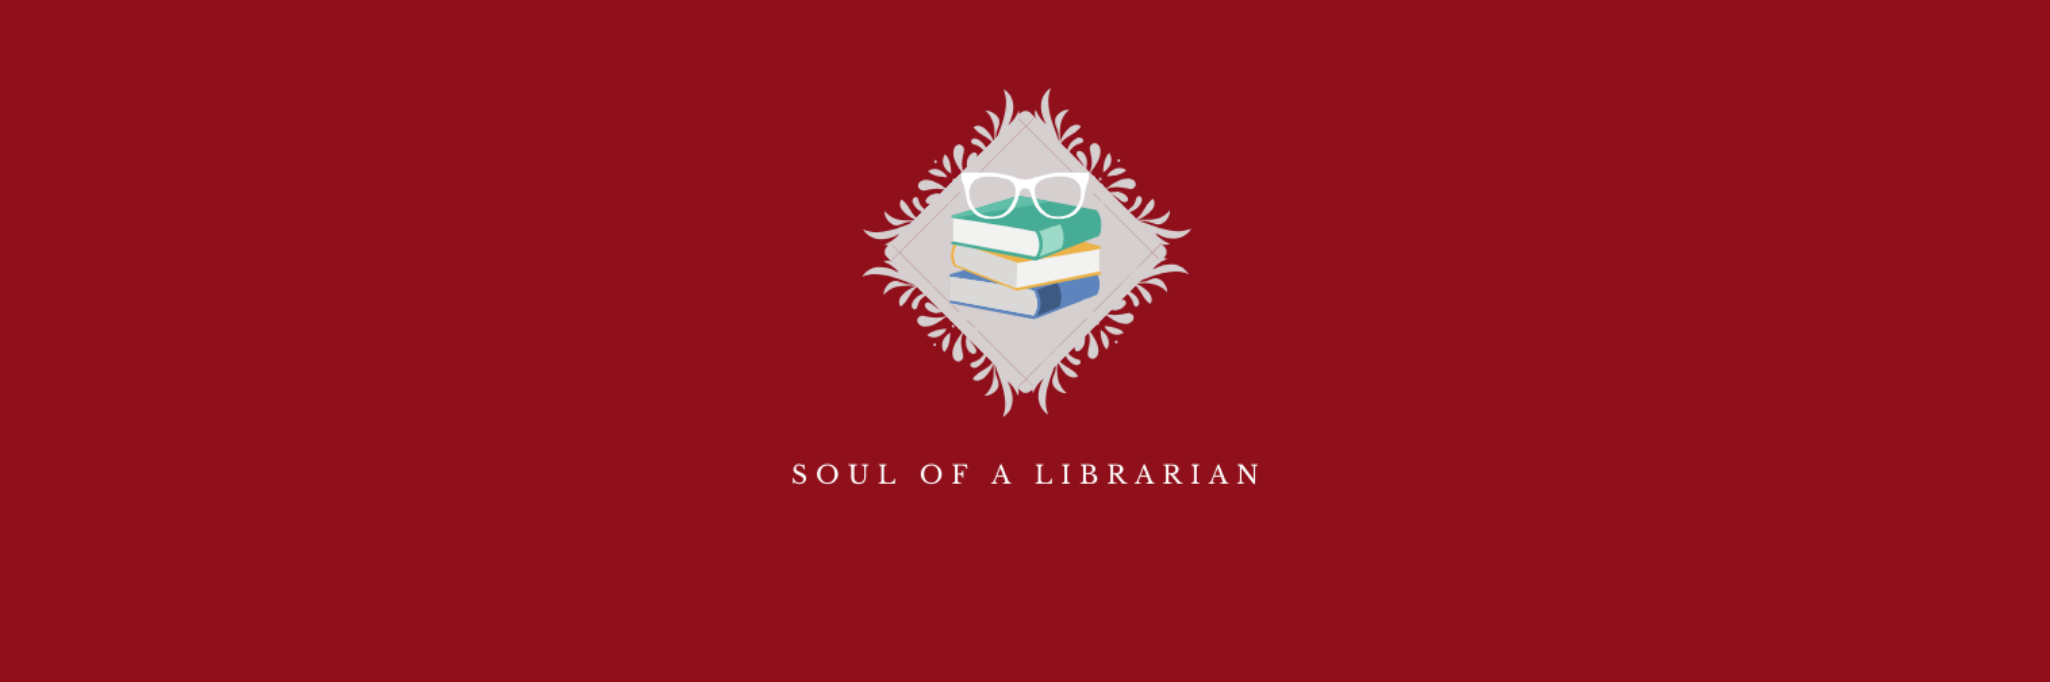 Soul of a Librarian